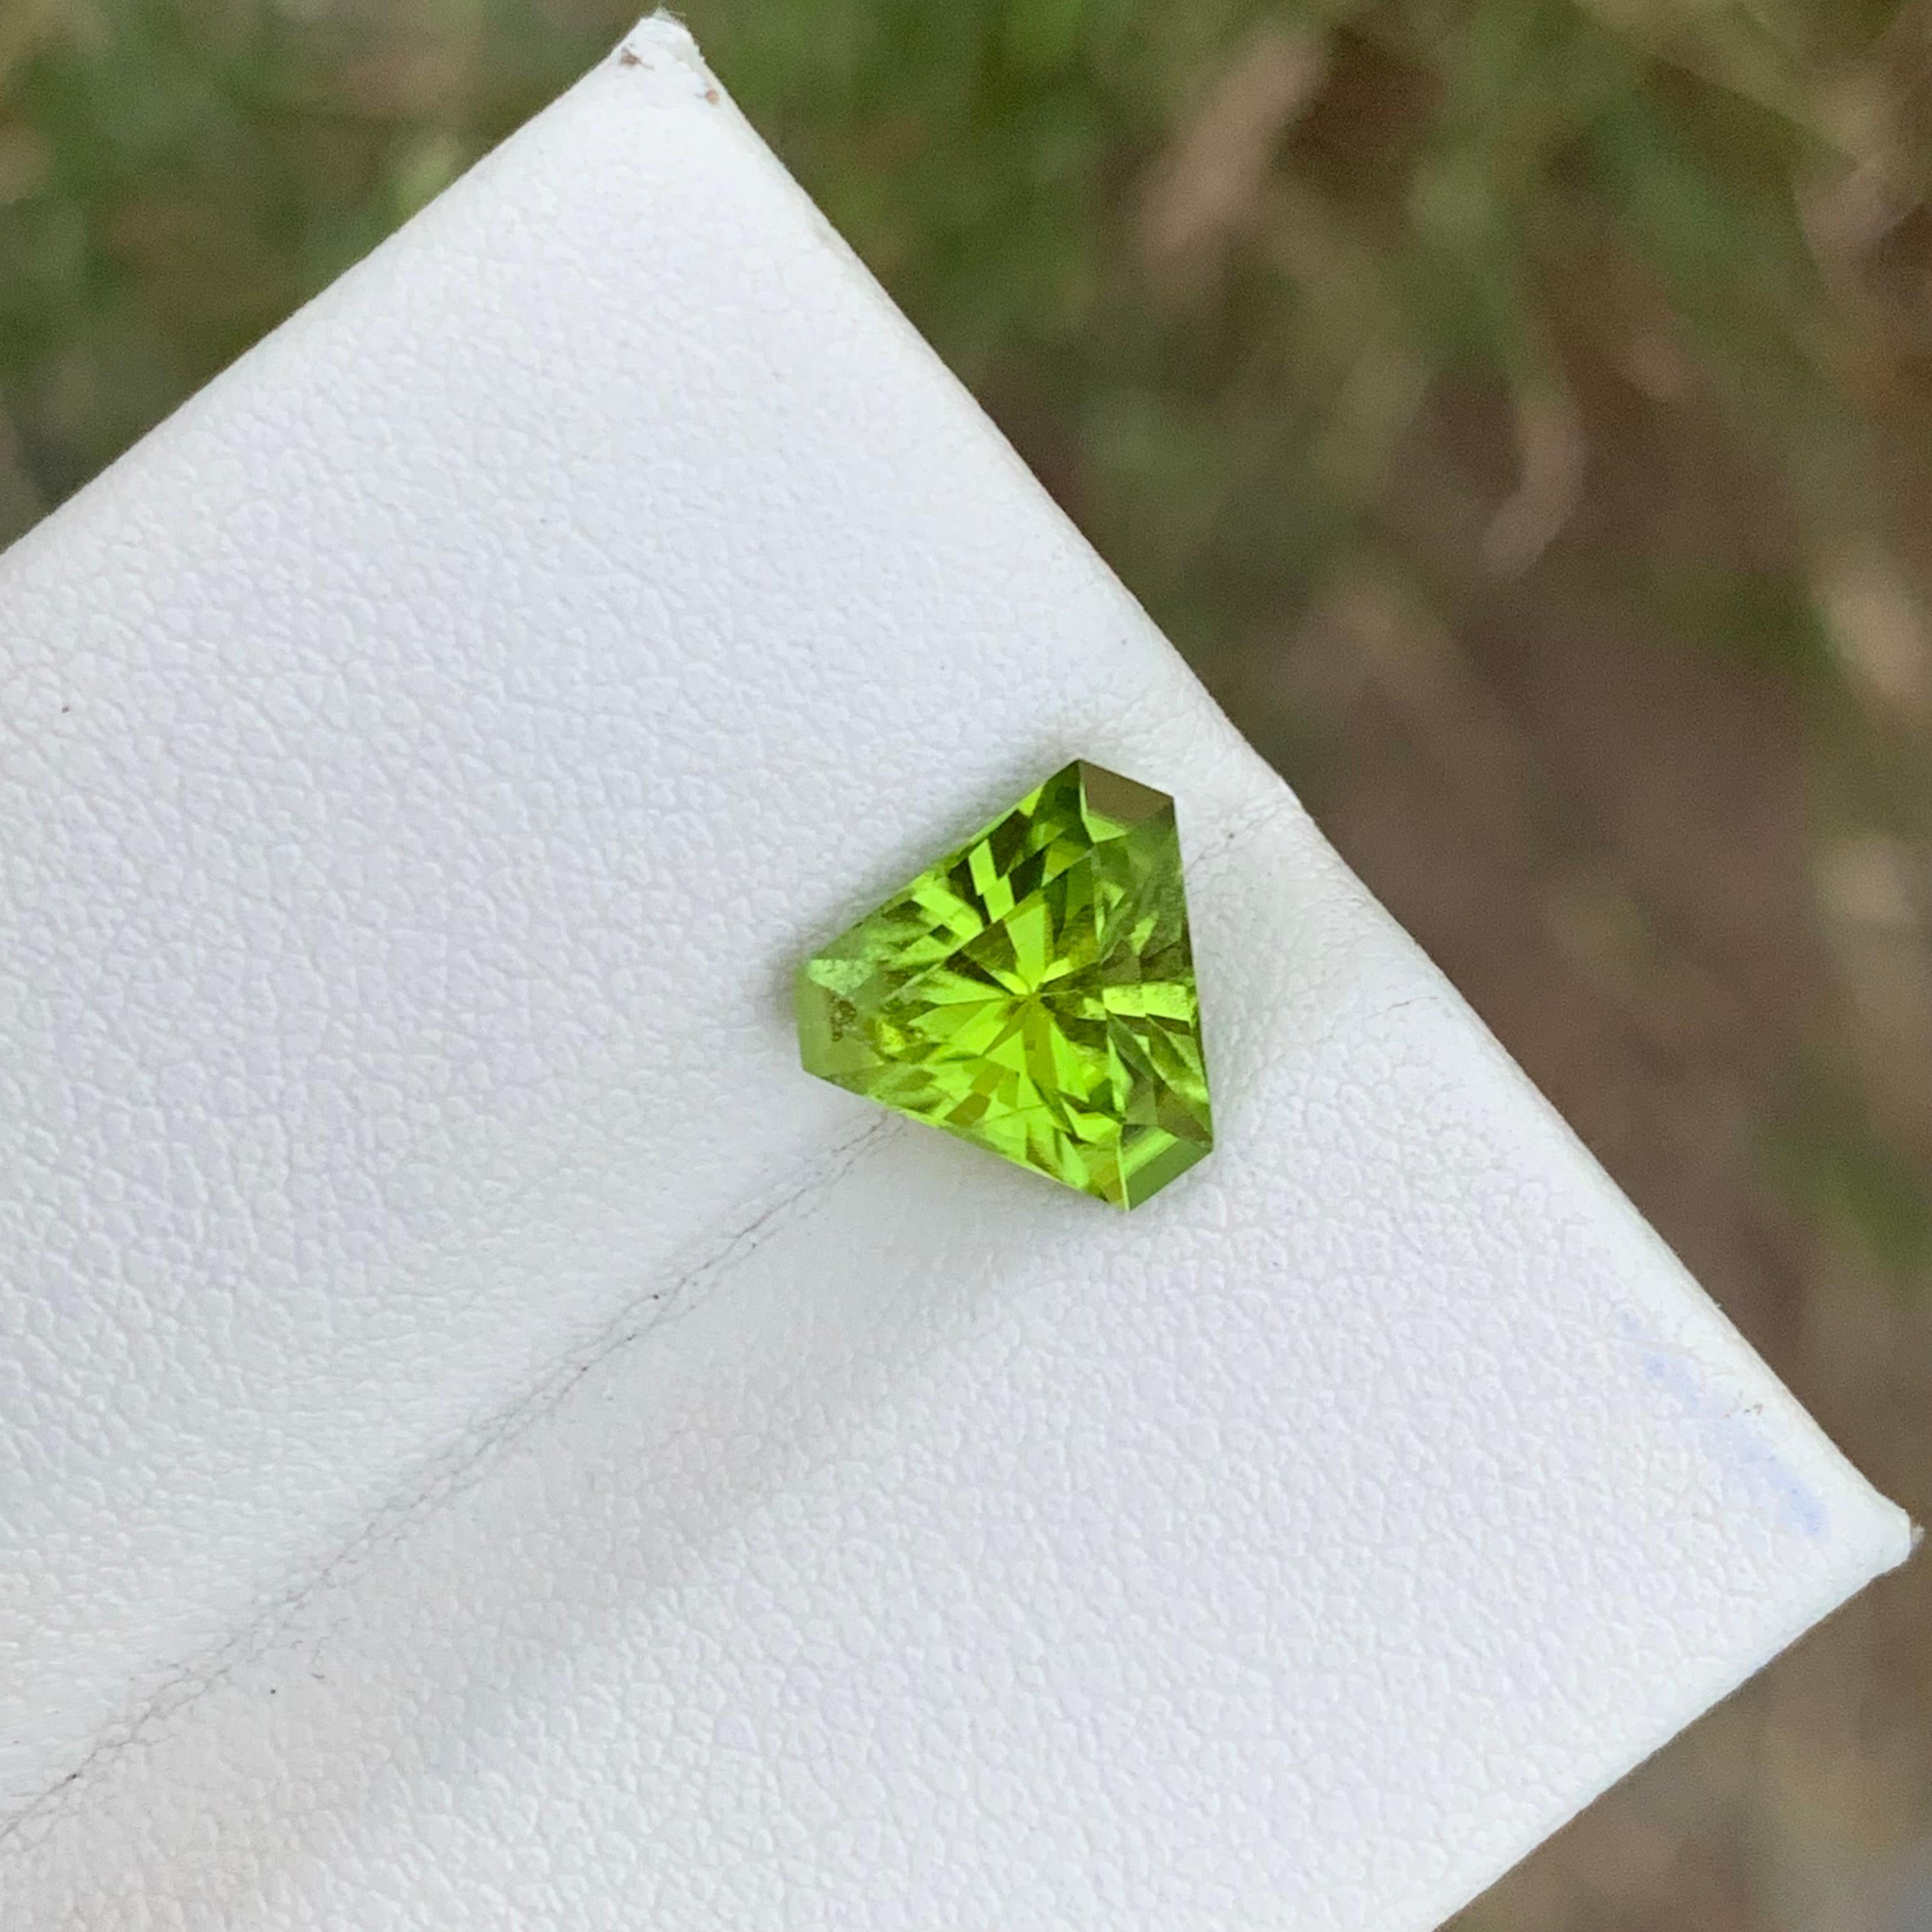 Faceted Peridot 
Weight: 2.60 Carats 
Dimension: 8.3x9.6x5.6 mm
Origin; Pakistan 
Shape: Trilliant
Color: Green
Treatment: Non
Peridot, a vibrant and dazzling gemstone, is a remarkable member of the olivine mineral family. Renowned for its stunning